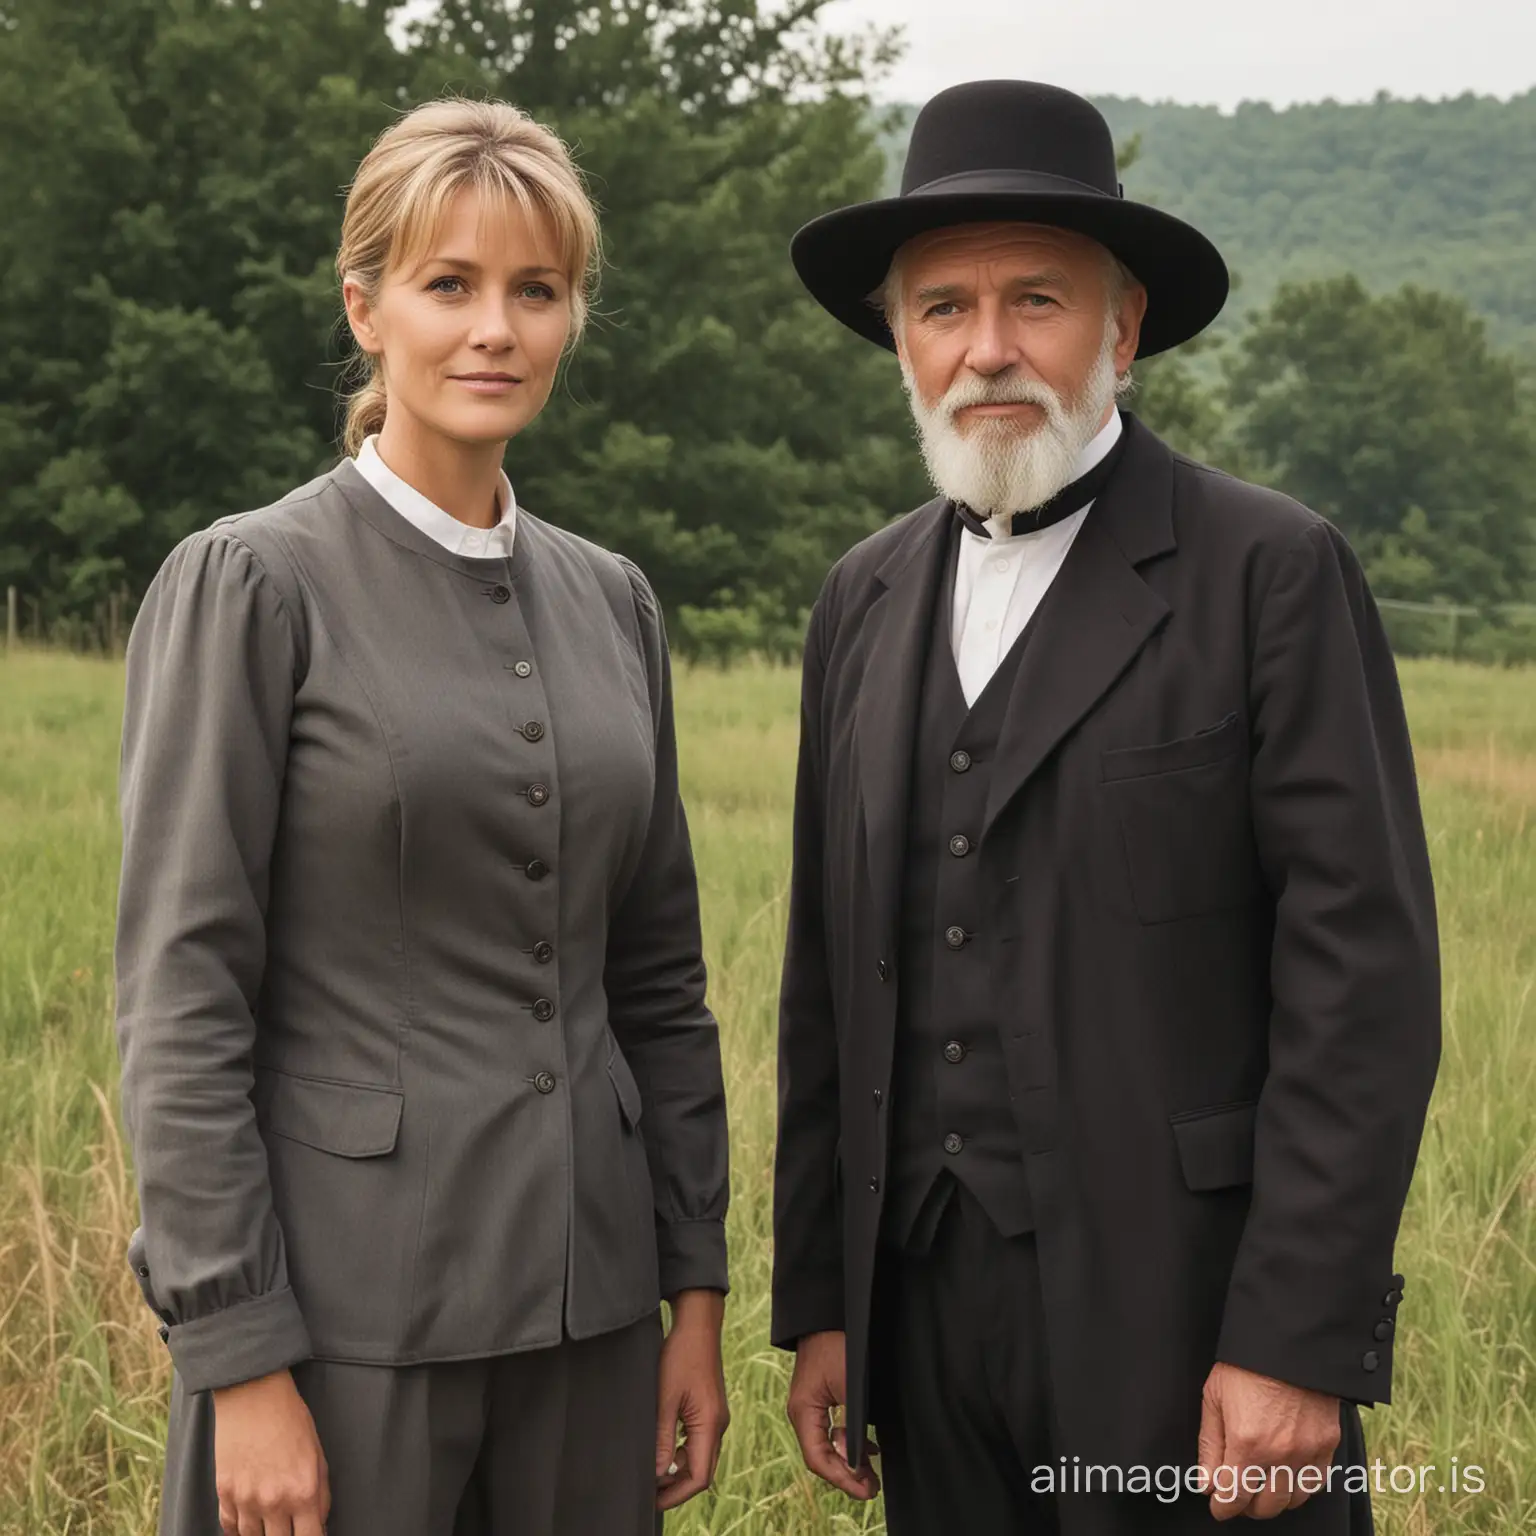 an old Amish man standing with Major Samantha Carter